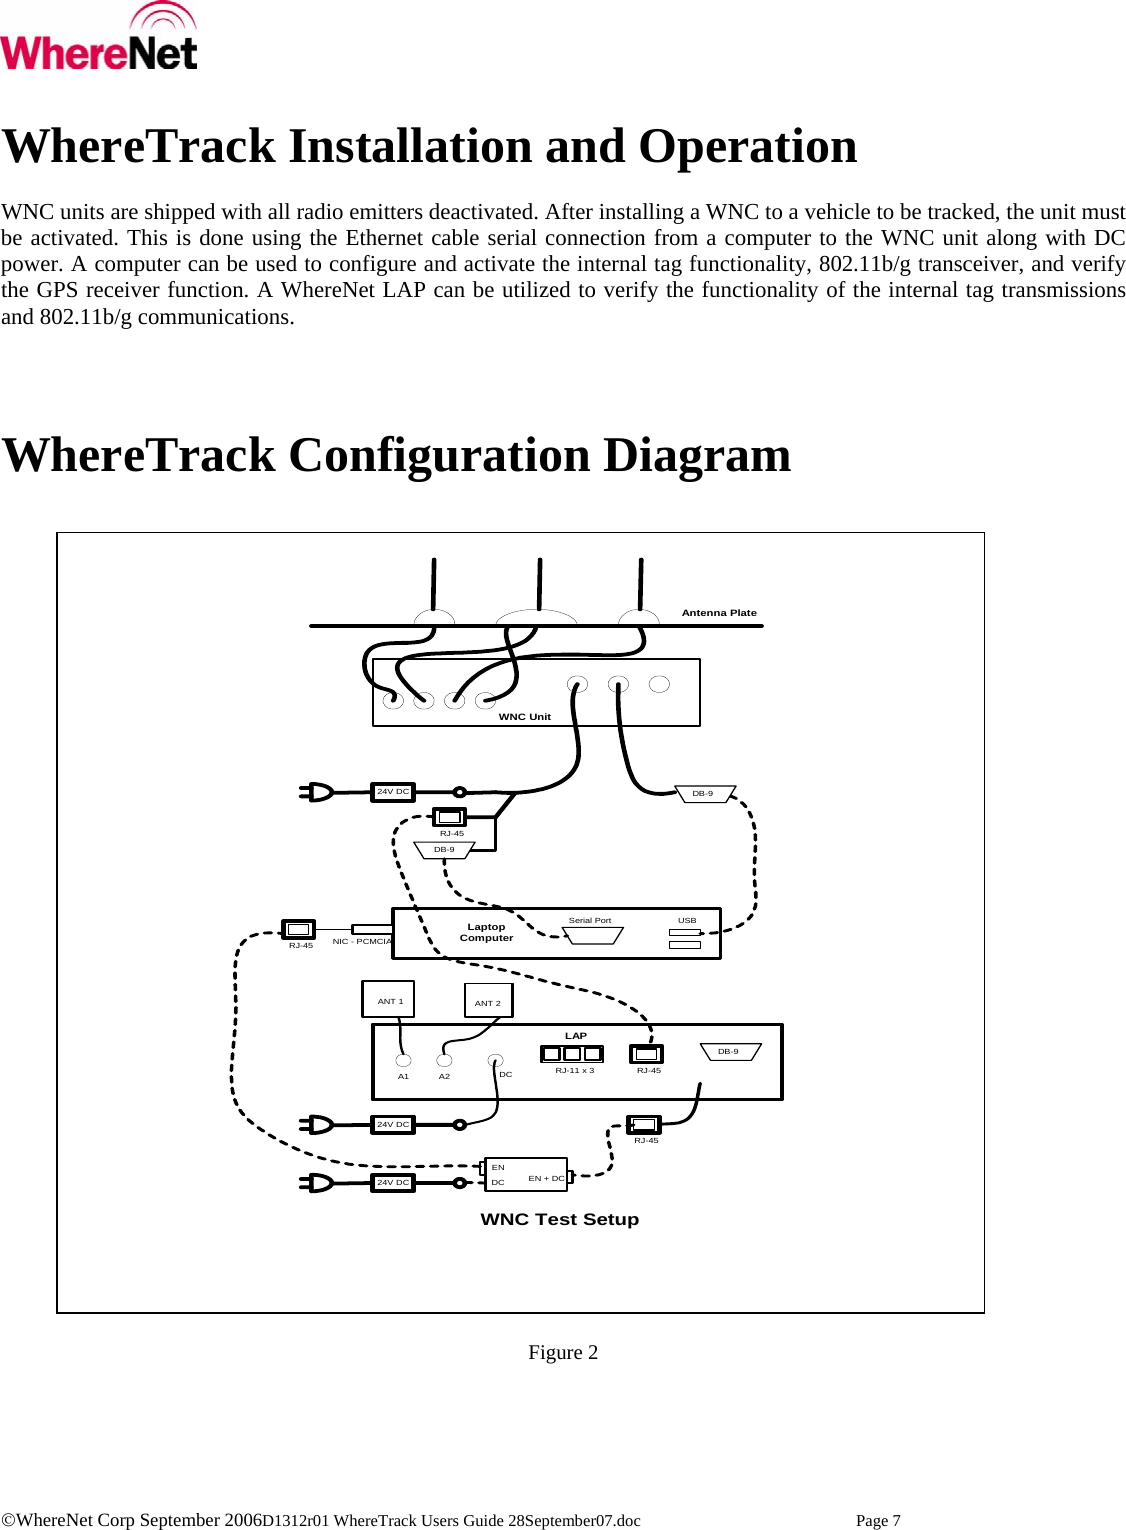    ©WhereNet Corp September 2006D1312r01 WhereTrack Users Guide 28September07.doc  Page 7  WhereTrack Installation and Operation  WNC units are shipped with all radio emitters deactivated. After installing a WNC to a vehicle to be tracked, the unit must be activated. This is done using the Ethernet cable serial connection from a computer to the WNC unit along with DC power. A computer can be used to configure and activate the internal tag functionality, 802.11b/g transceiver, and verify the GPS receiver function. A WhereNet LAP can be utilized to verify the functionality of the internal tag transmissions and 802.11b/g communications.       WhereTrack Configuration Diagram    DB-9RJ-45LaptopComputerUSBSerial PortNIC - PCMCIARJ-45DB-9LAPRJ-45DB-9RJ-11 x 3RJ-45A1 A2 DCANT 1 ANT 224V DC24V DCENDC EN + DC24V DCWNC Test SetupWNC UnitAntenna Plate     Figure 2      